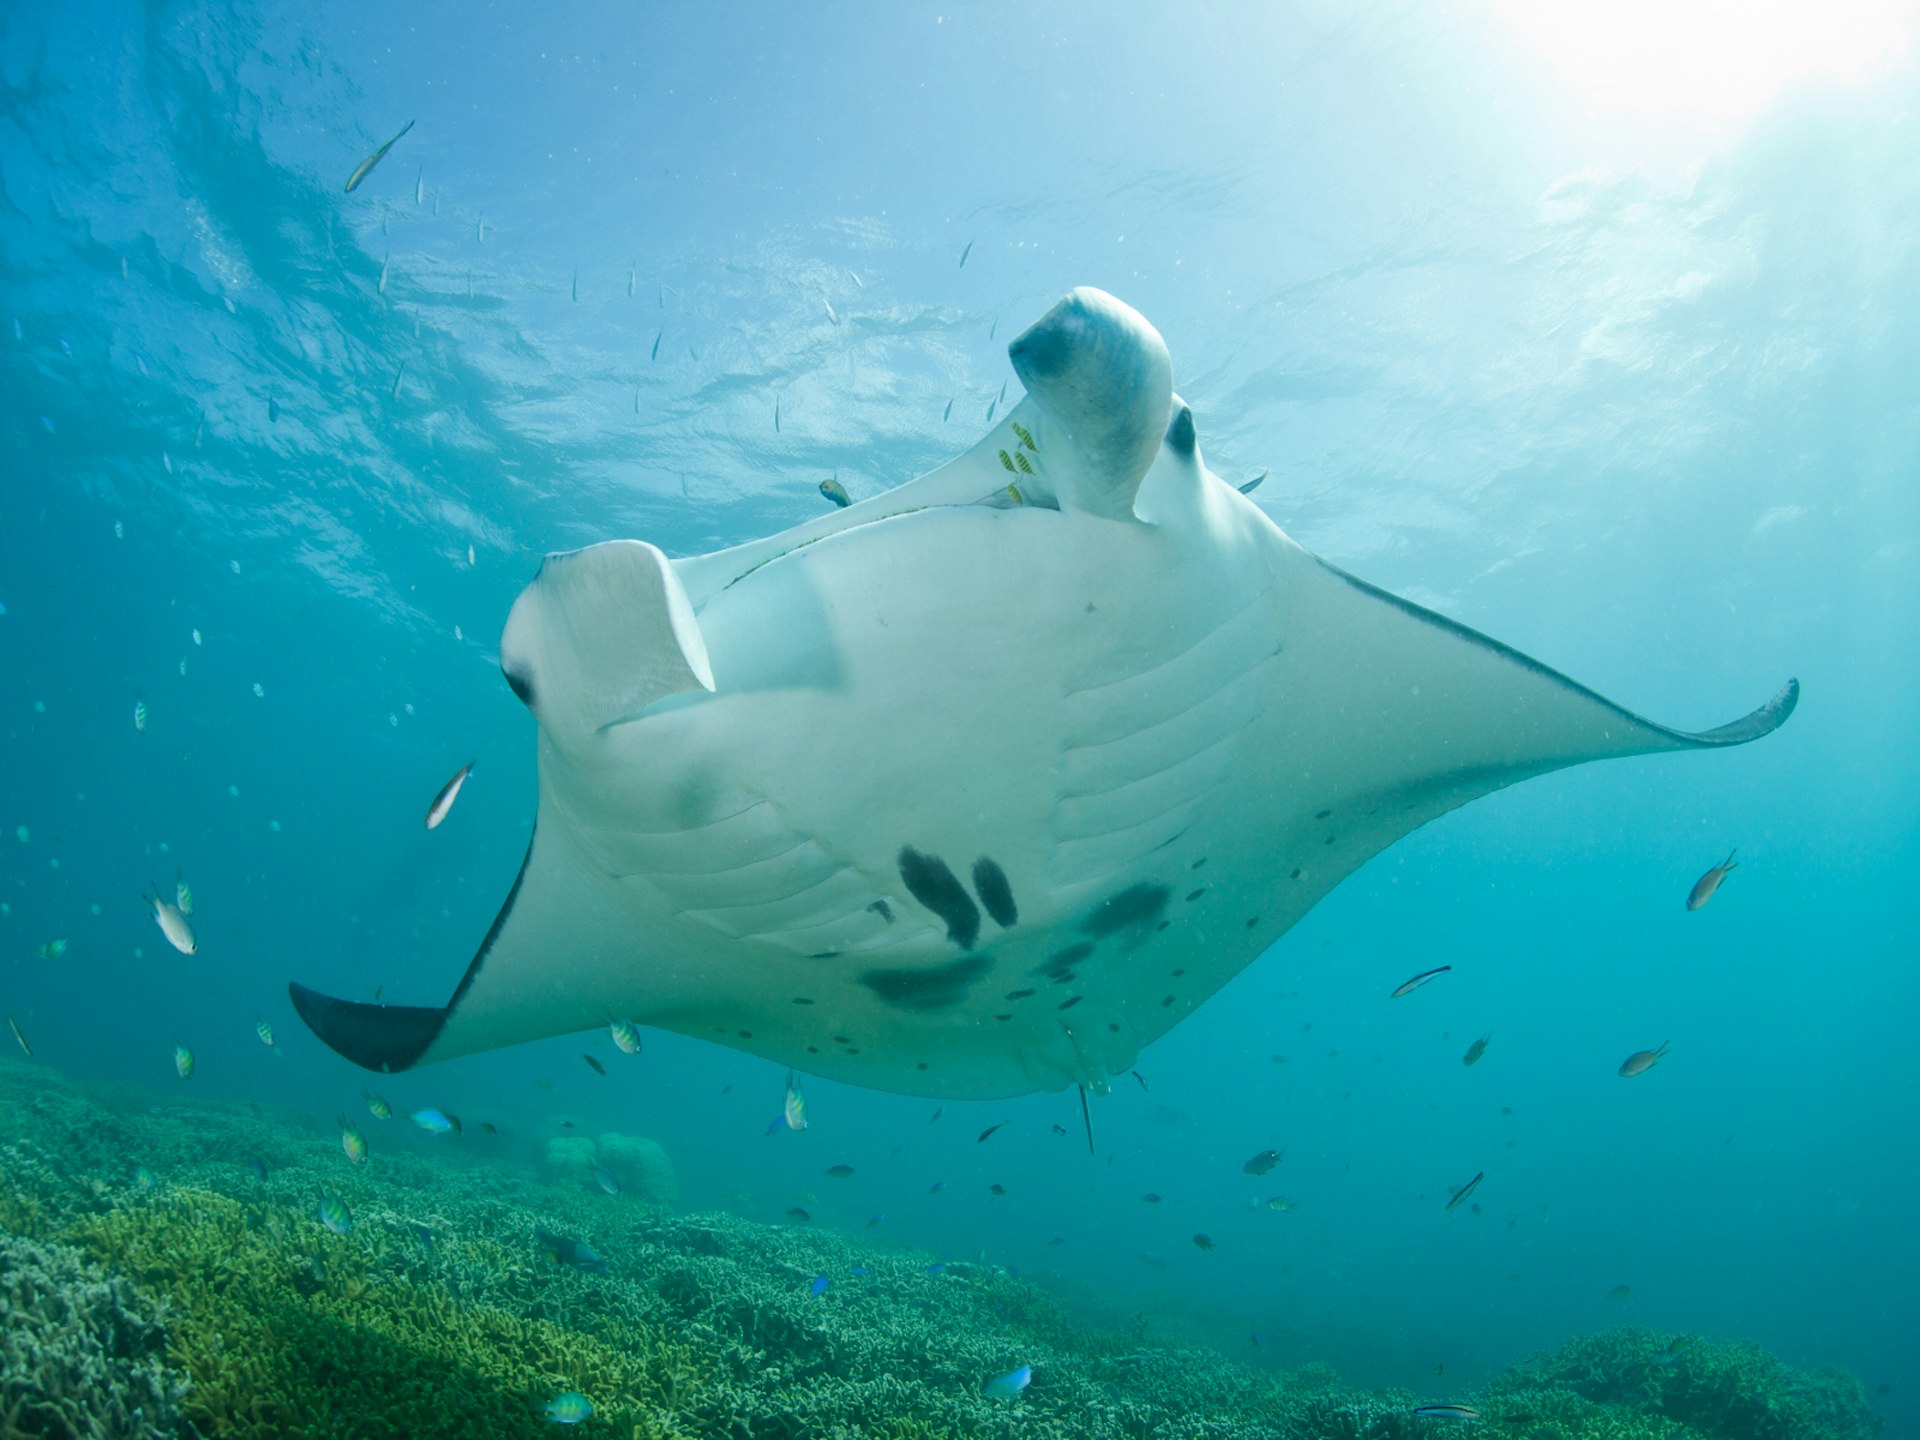 A giant manta ray surrounded by small fish swims through the ocean around Micronesia